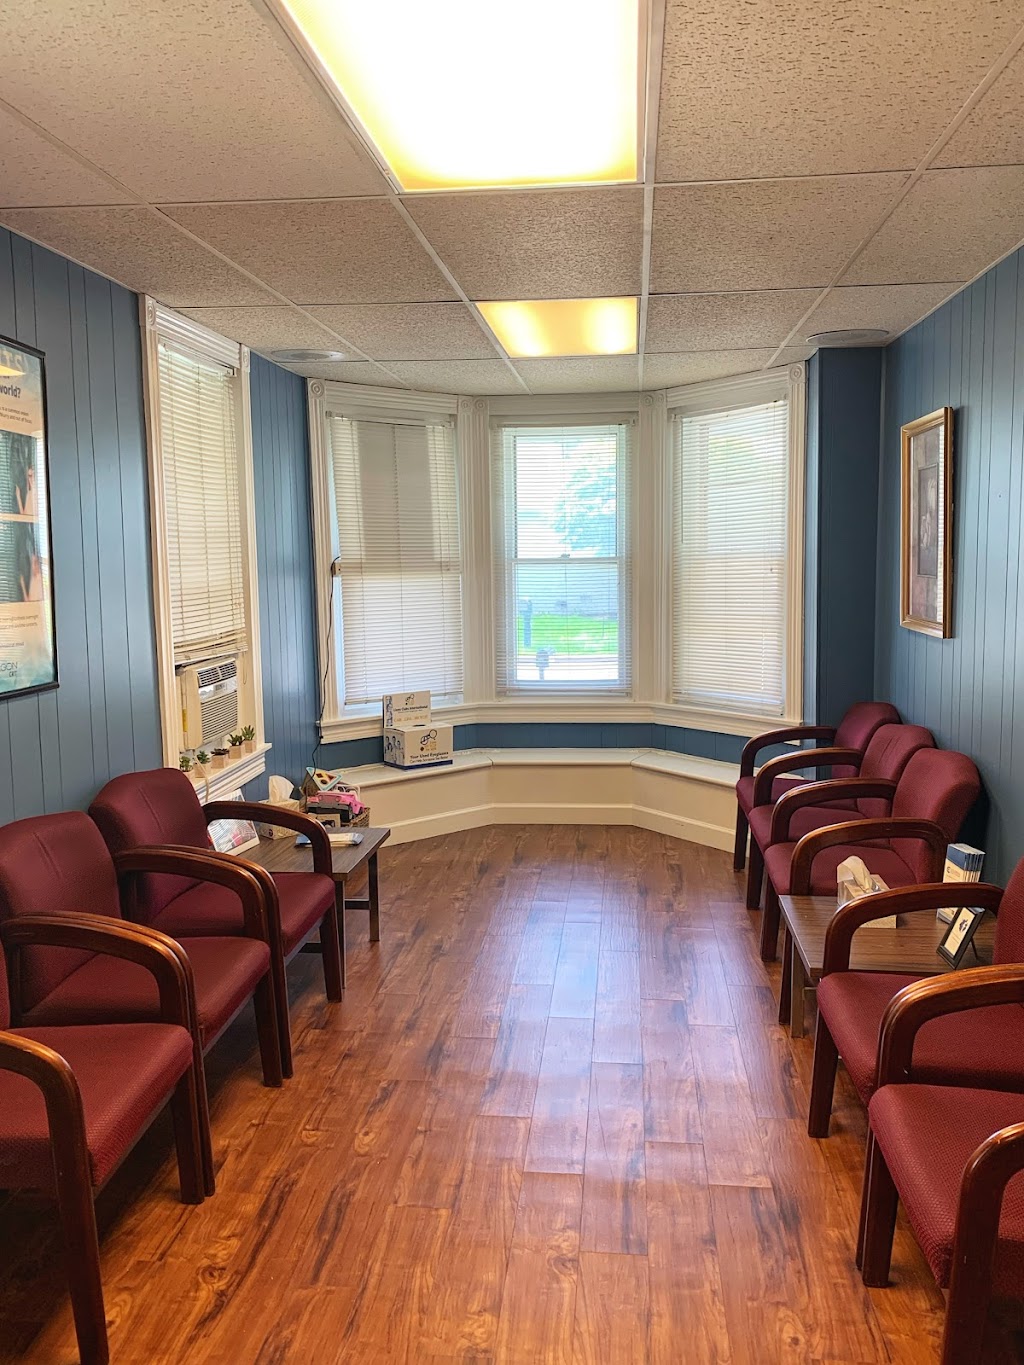 Colonial Family Eyecare | 621 Valley Forge Rd, Phoenixville, PA 19460 | Phone: (610) 935-8800